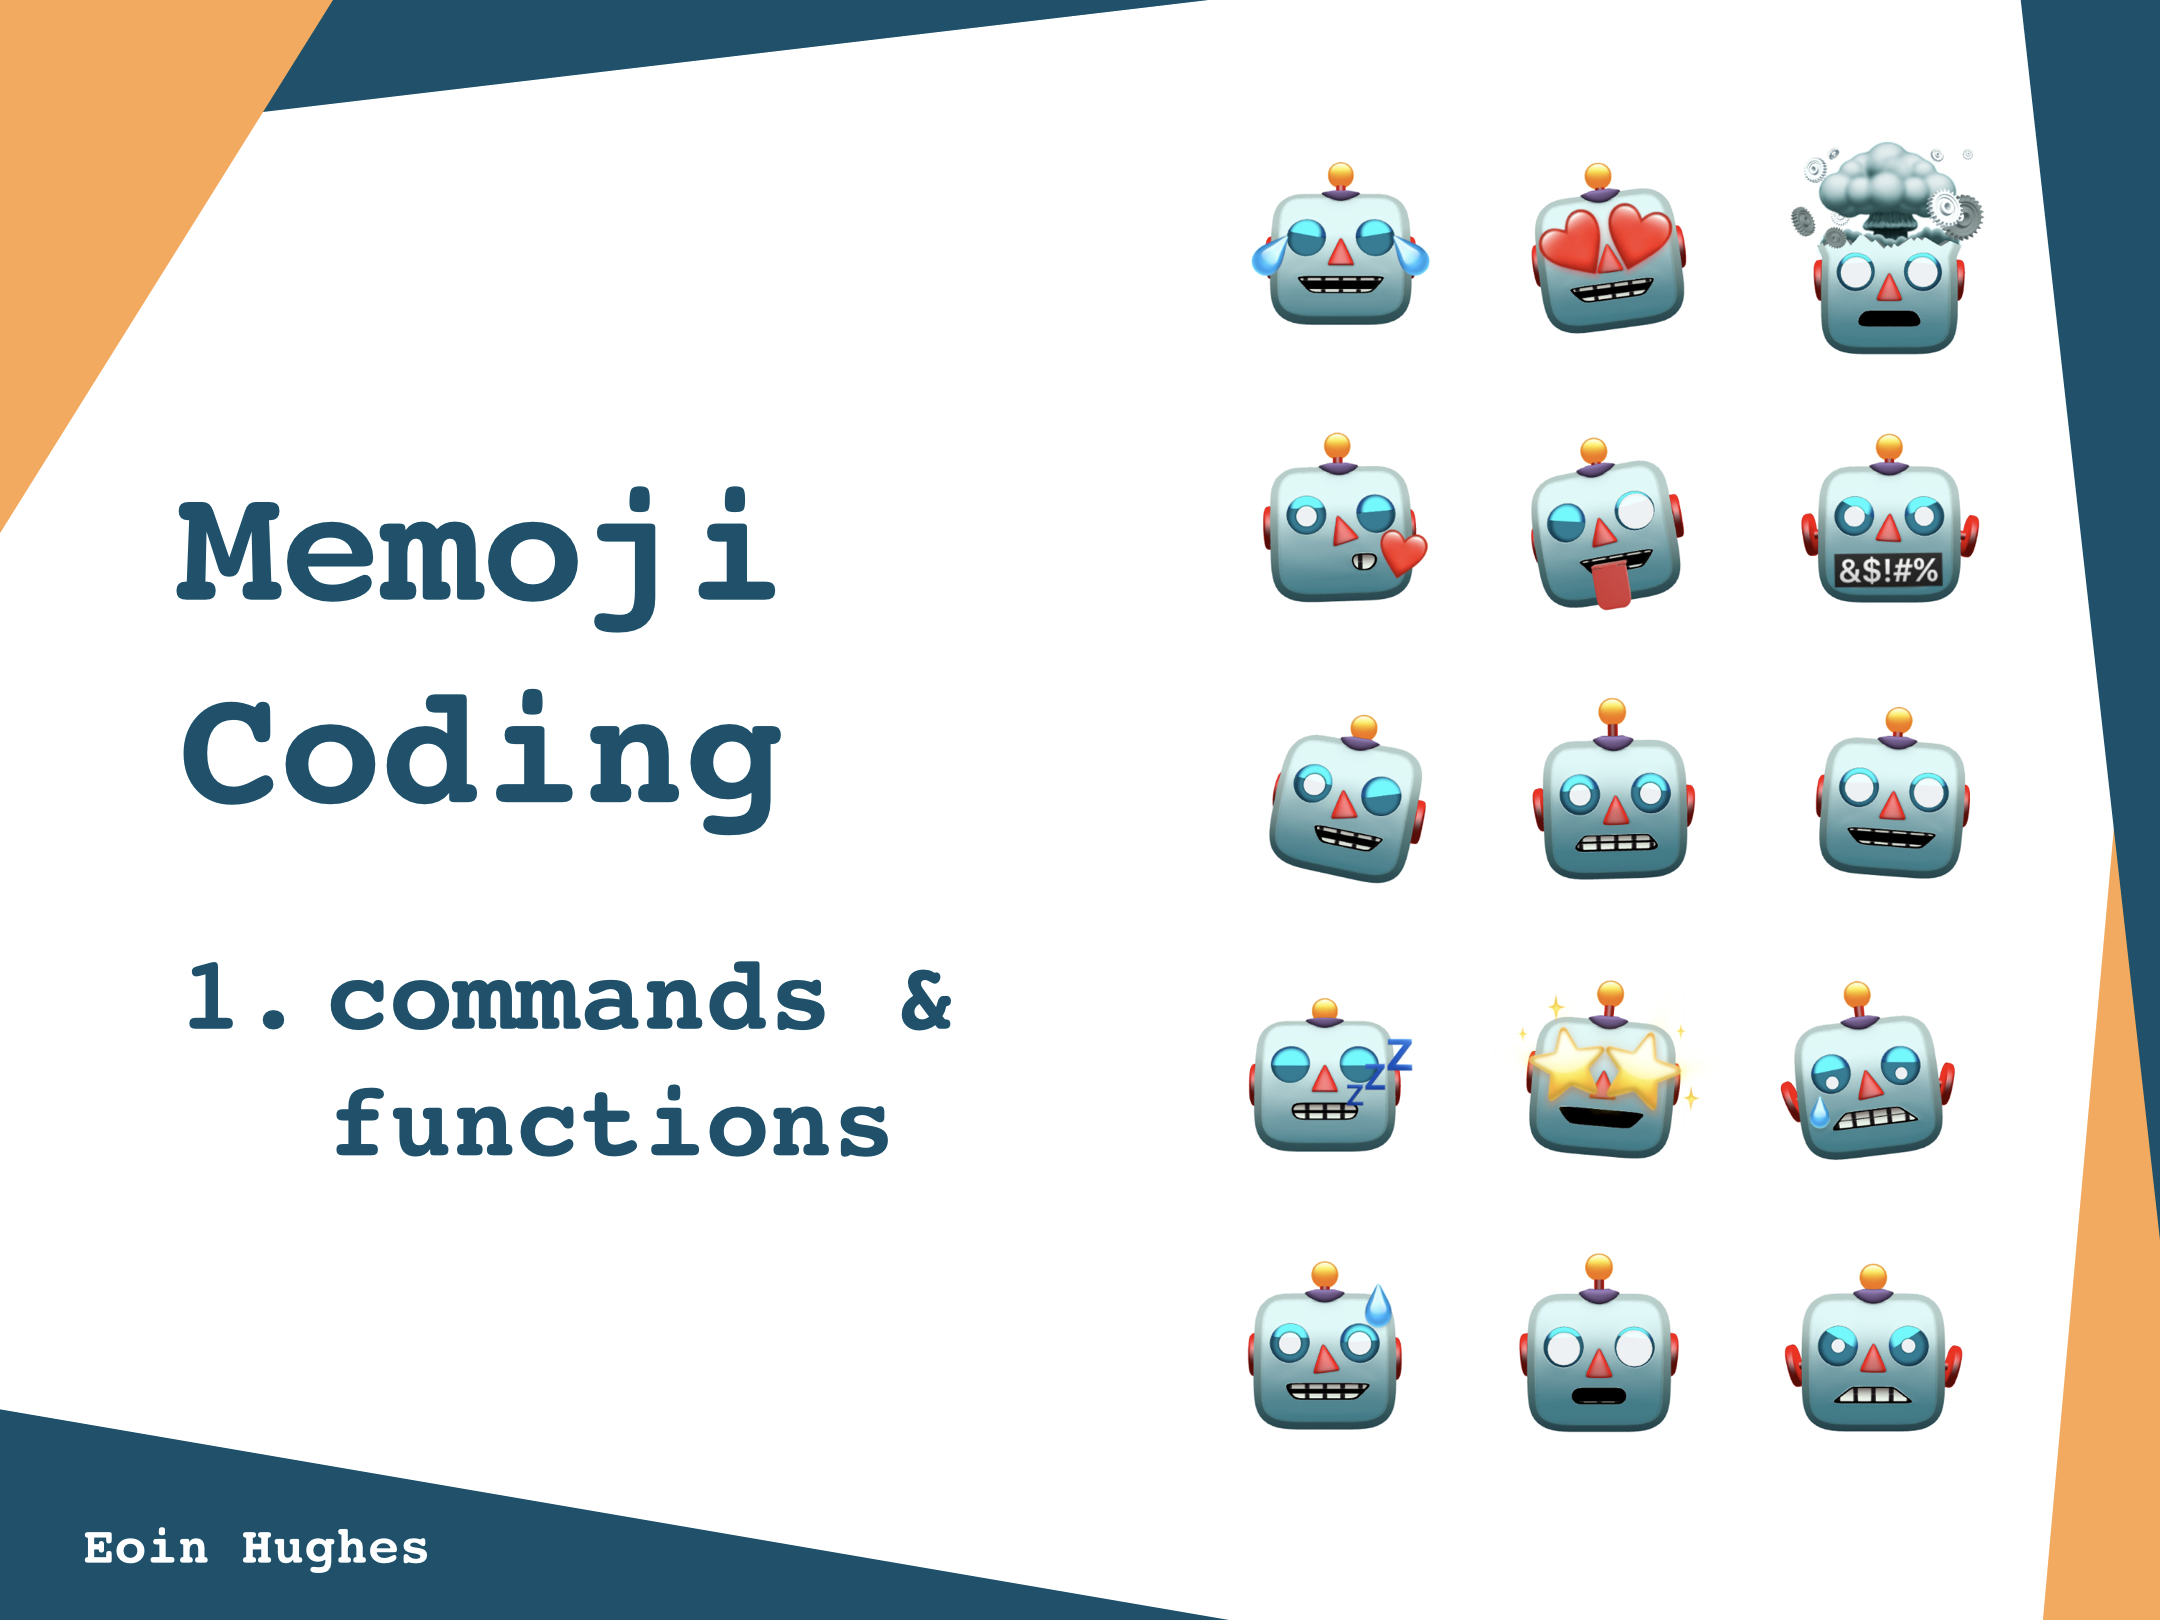 Memoji Coding: 1. Commands and Functions. Right hand side of the image contains various robot Memoji stickers.